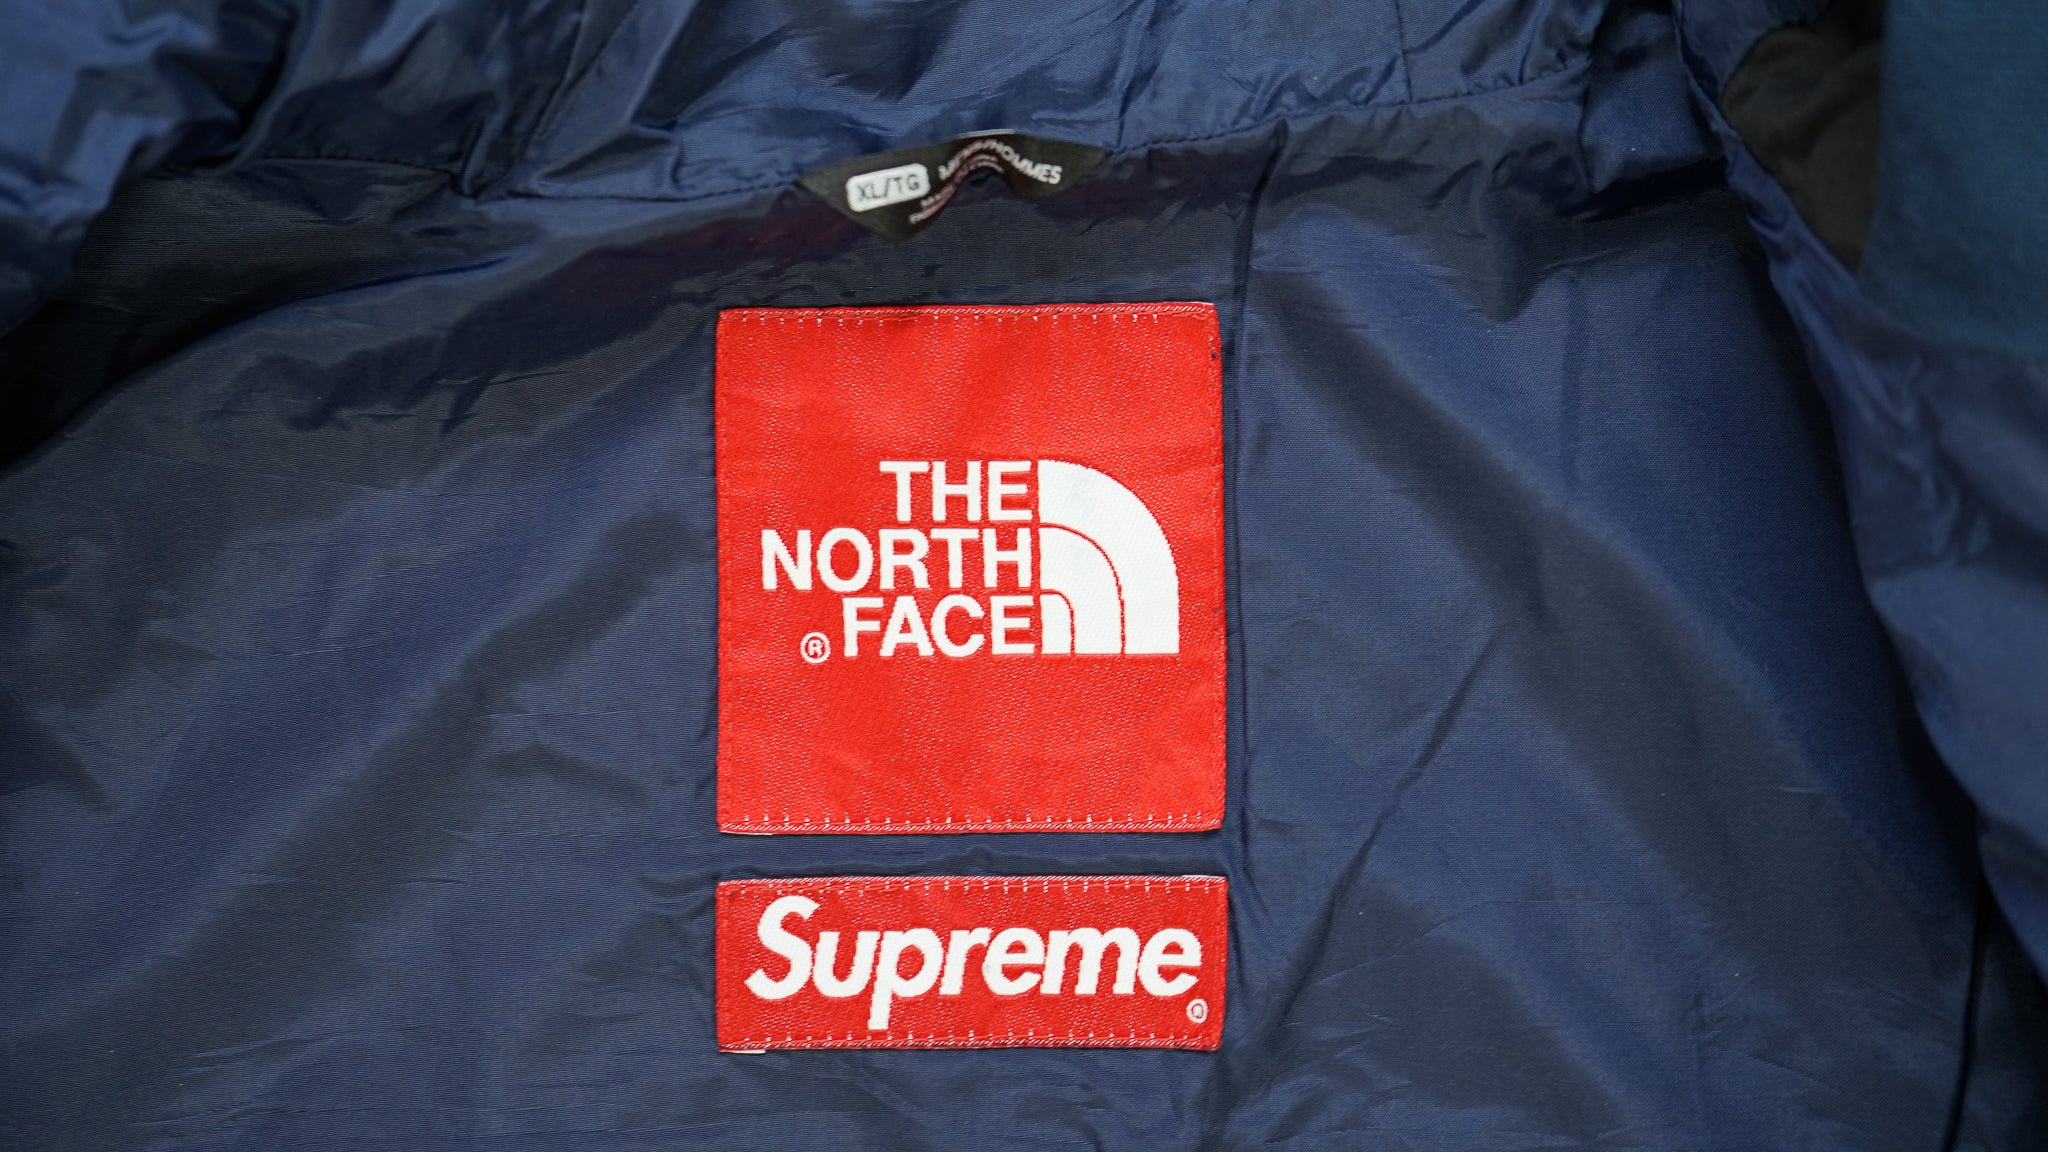 SS15 Supreme x The North Face 